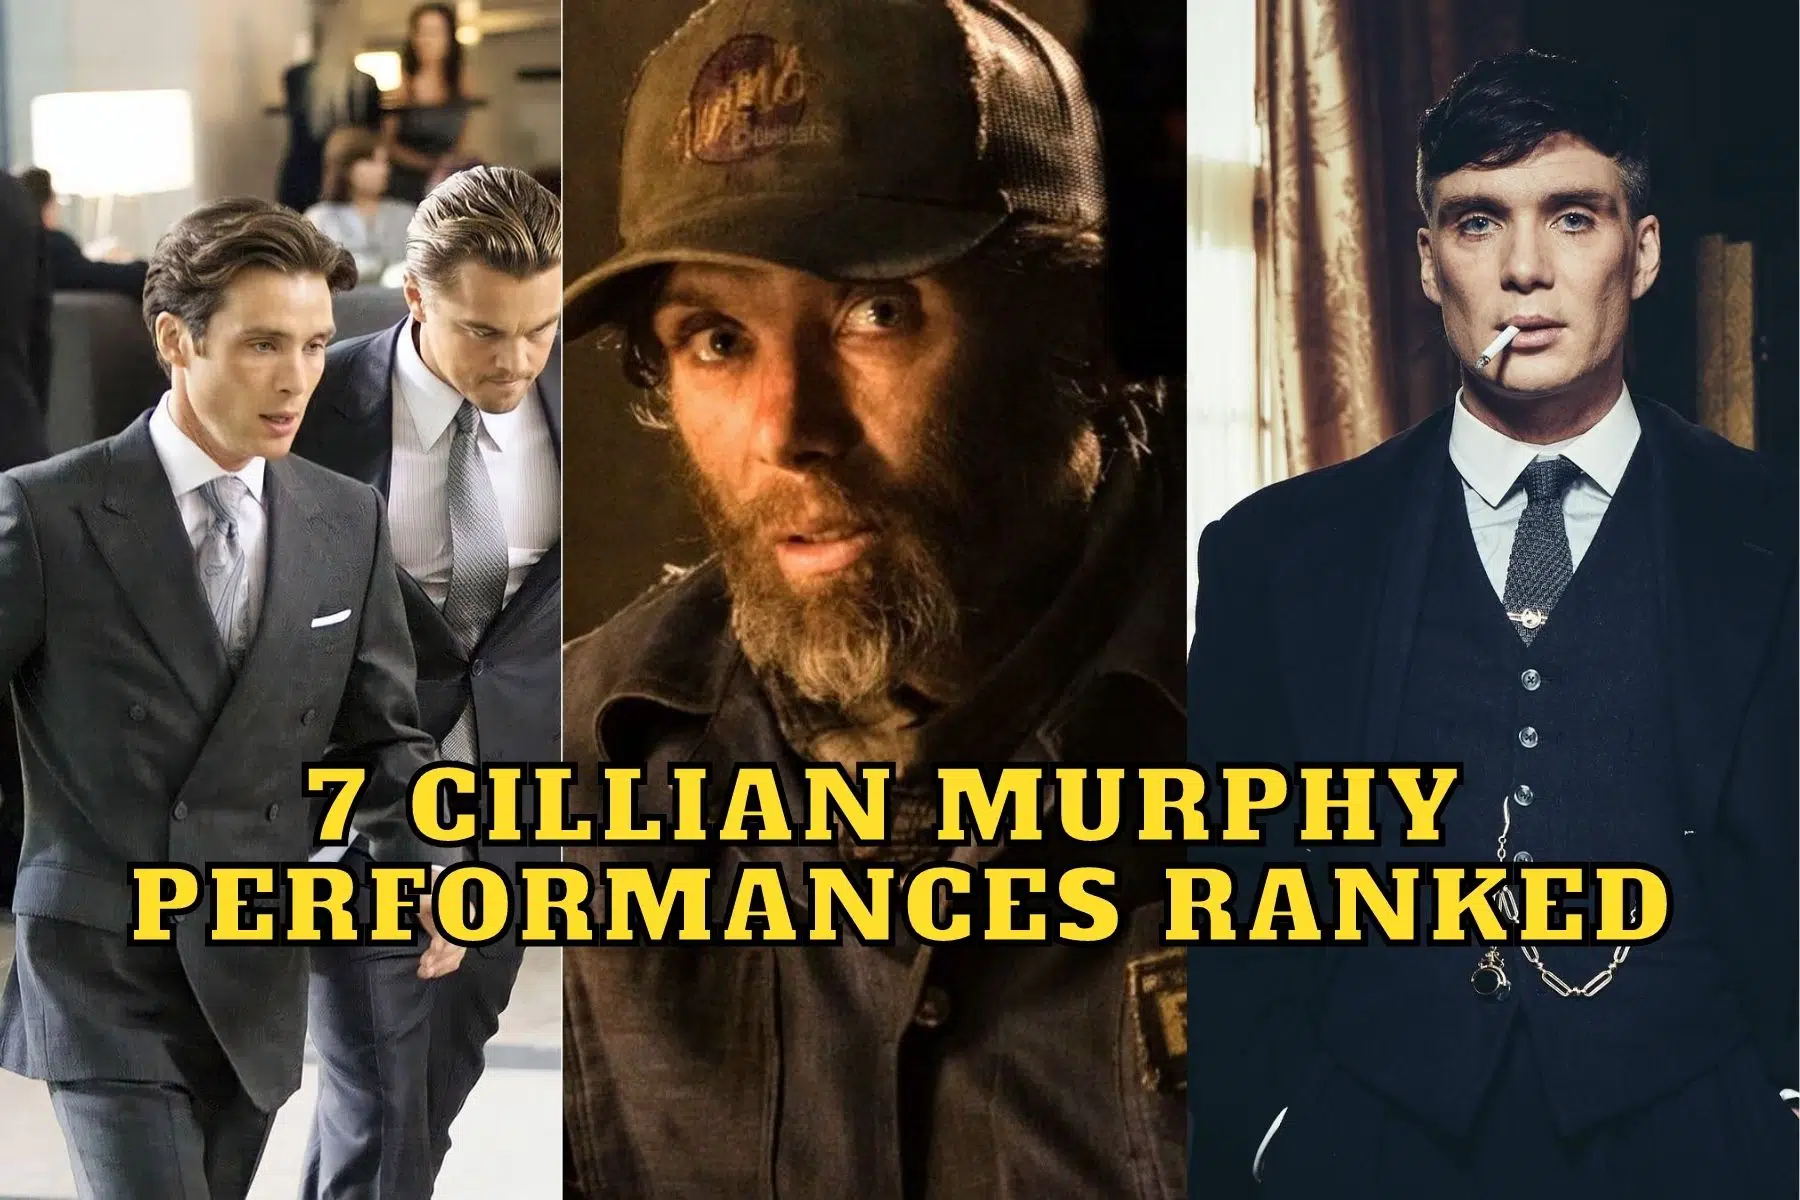 7 Cillian Murphy Performances Ranked from Best to Worst